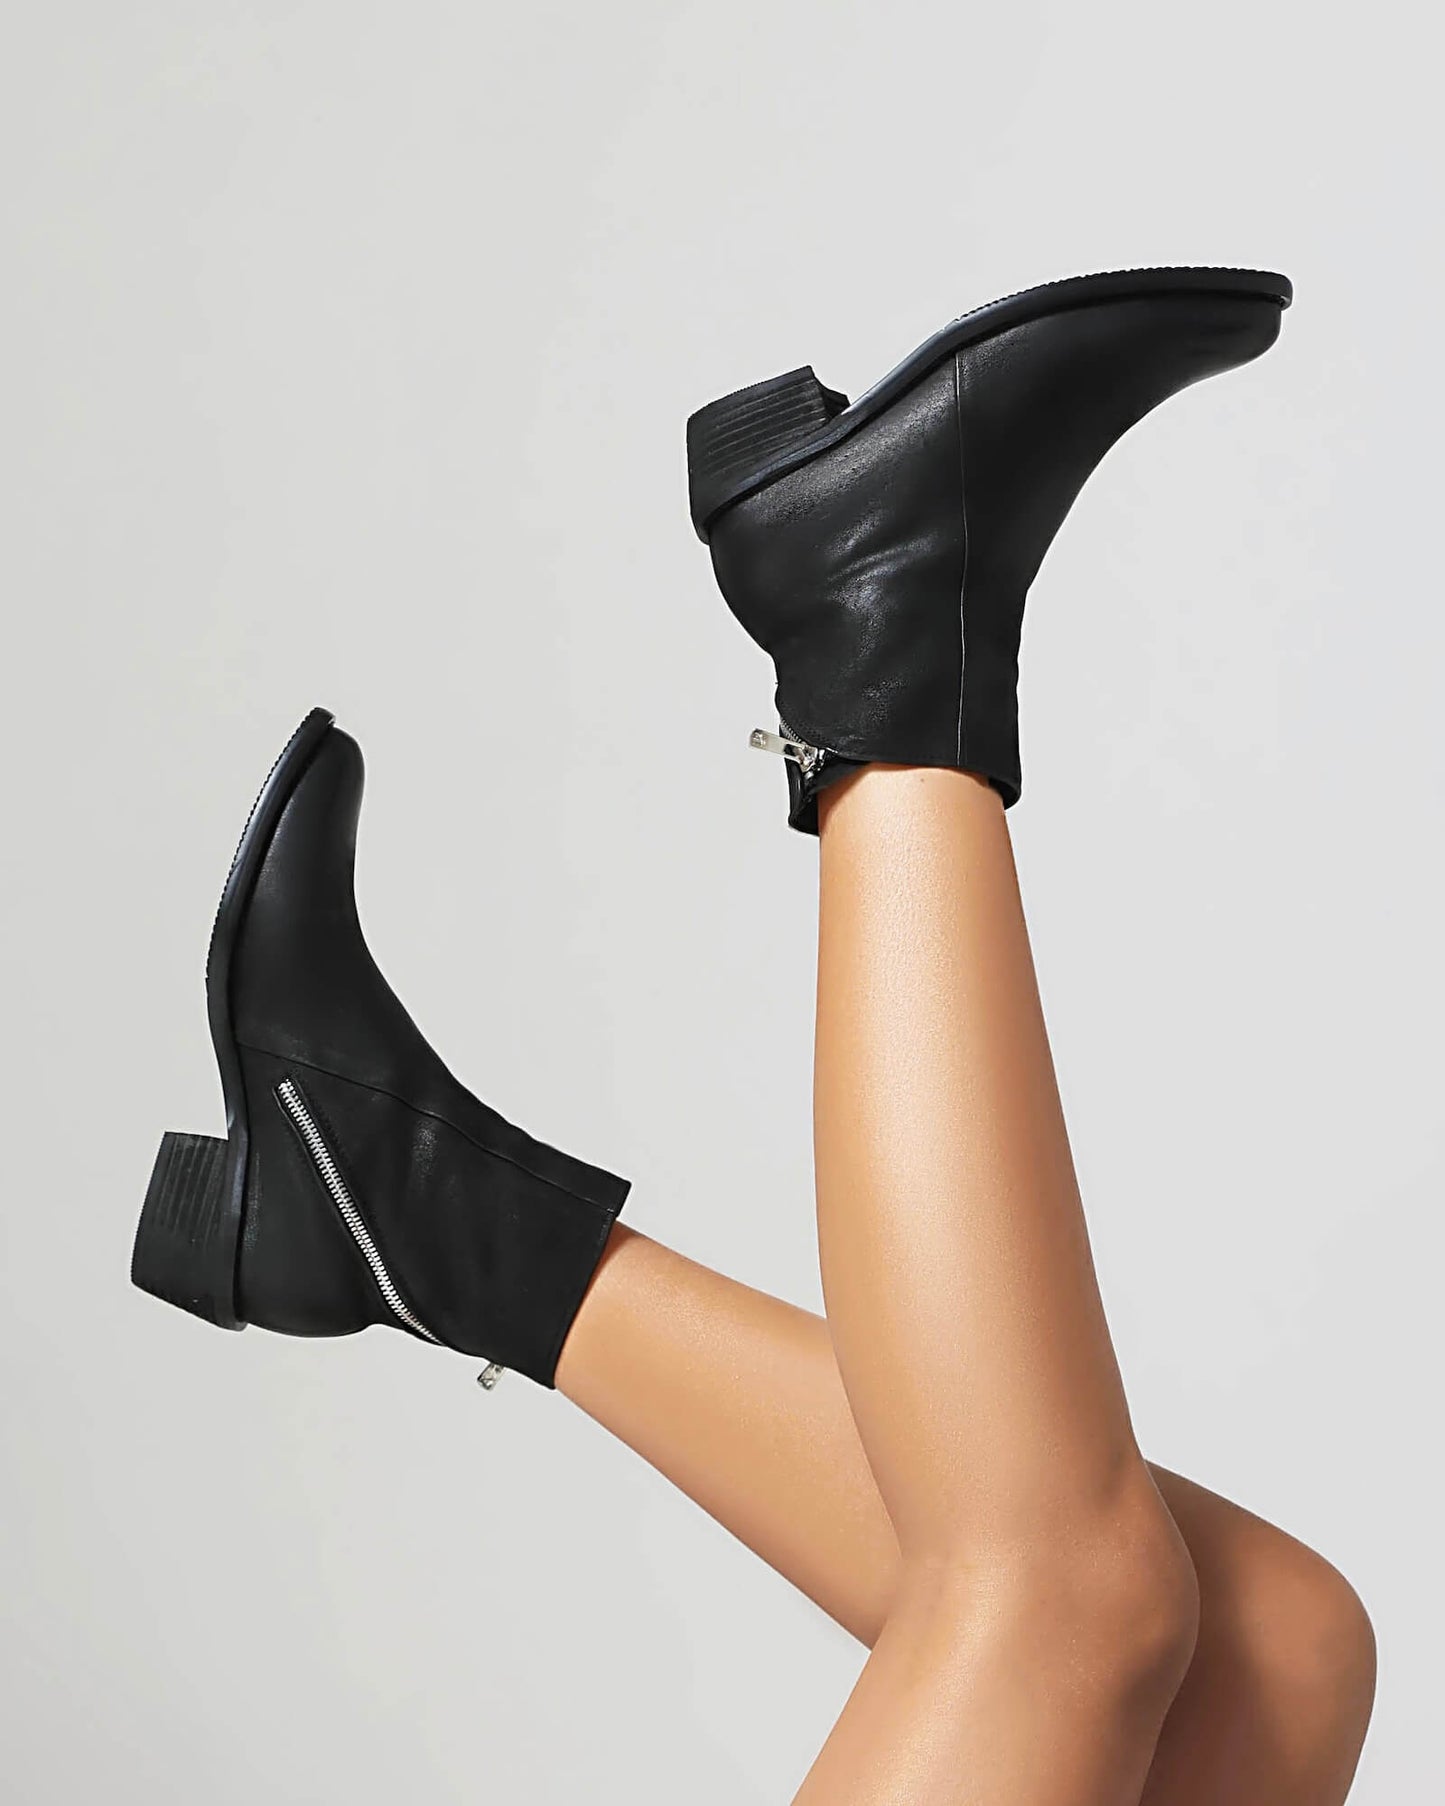 321-black-leather-pointed-toe-boots-model-2